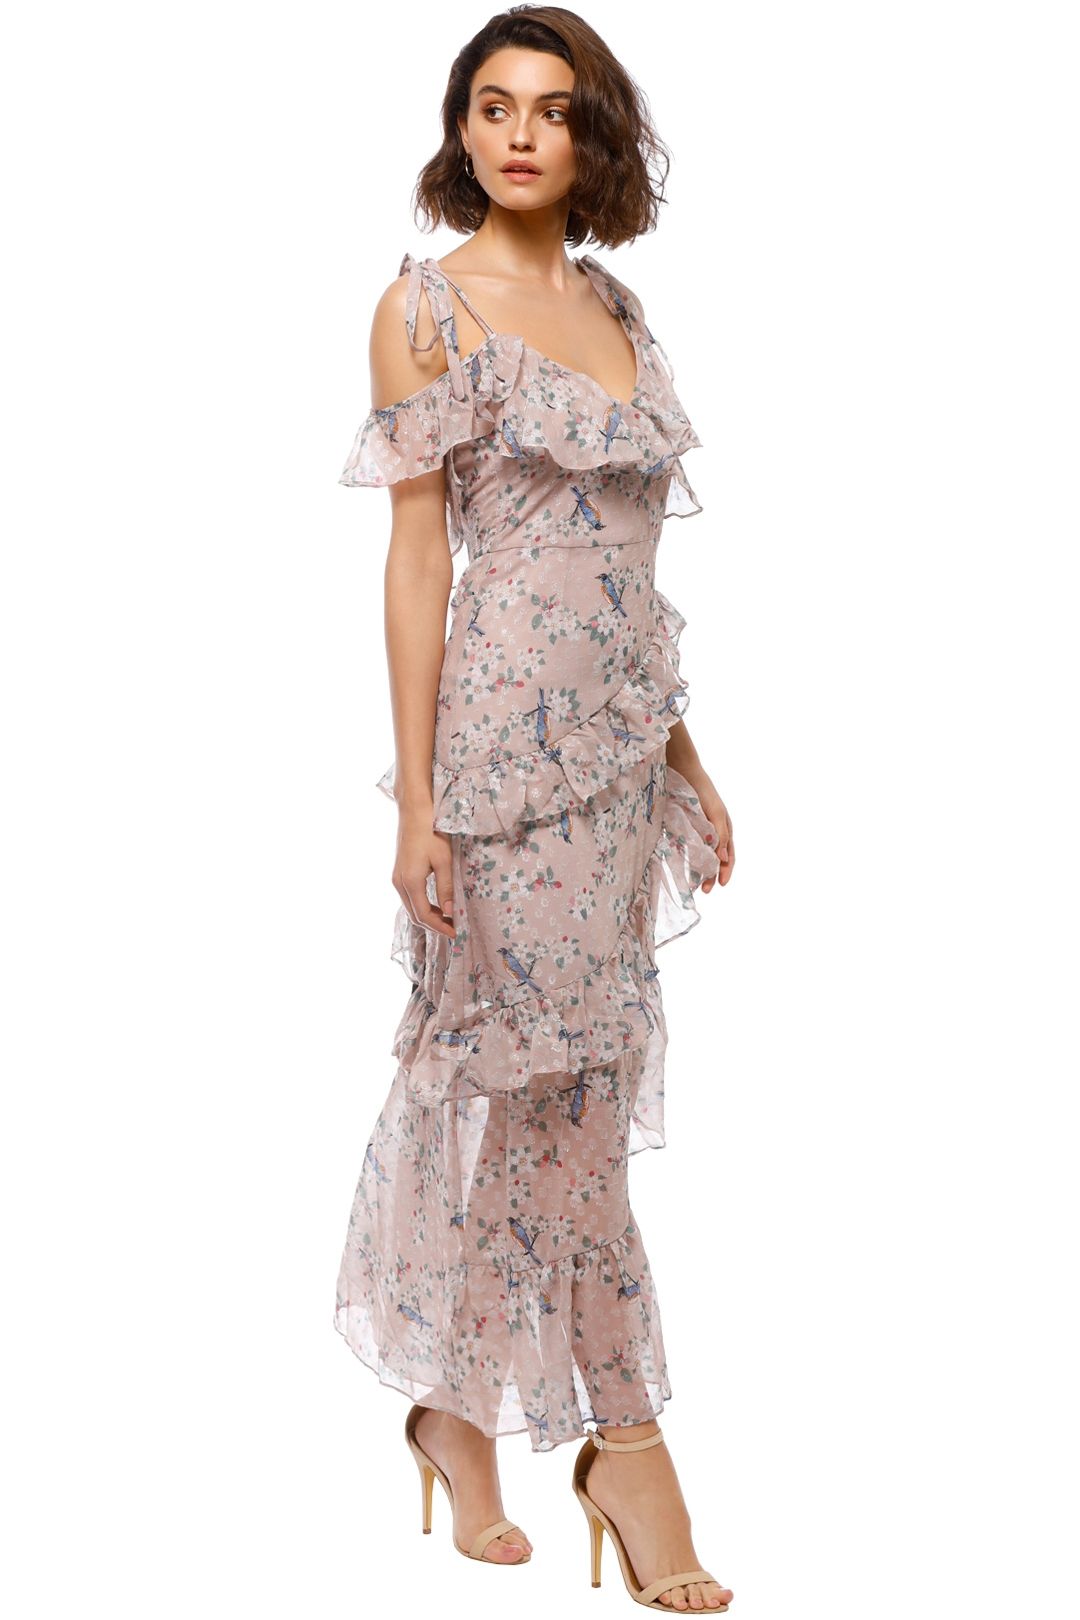 We Are Kindred - Pippa Ruffle Maxi Dress - Pastel Pink - Side